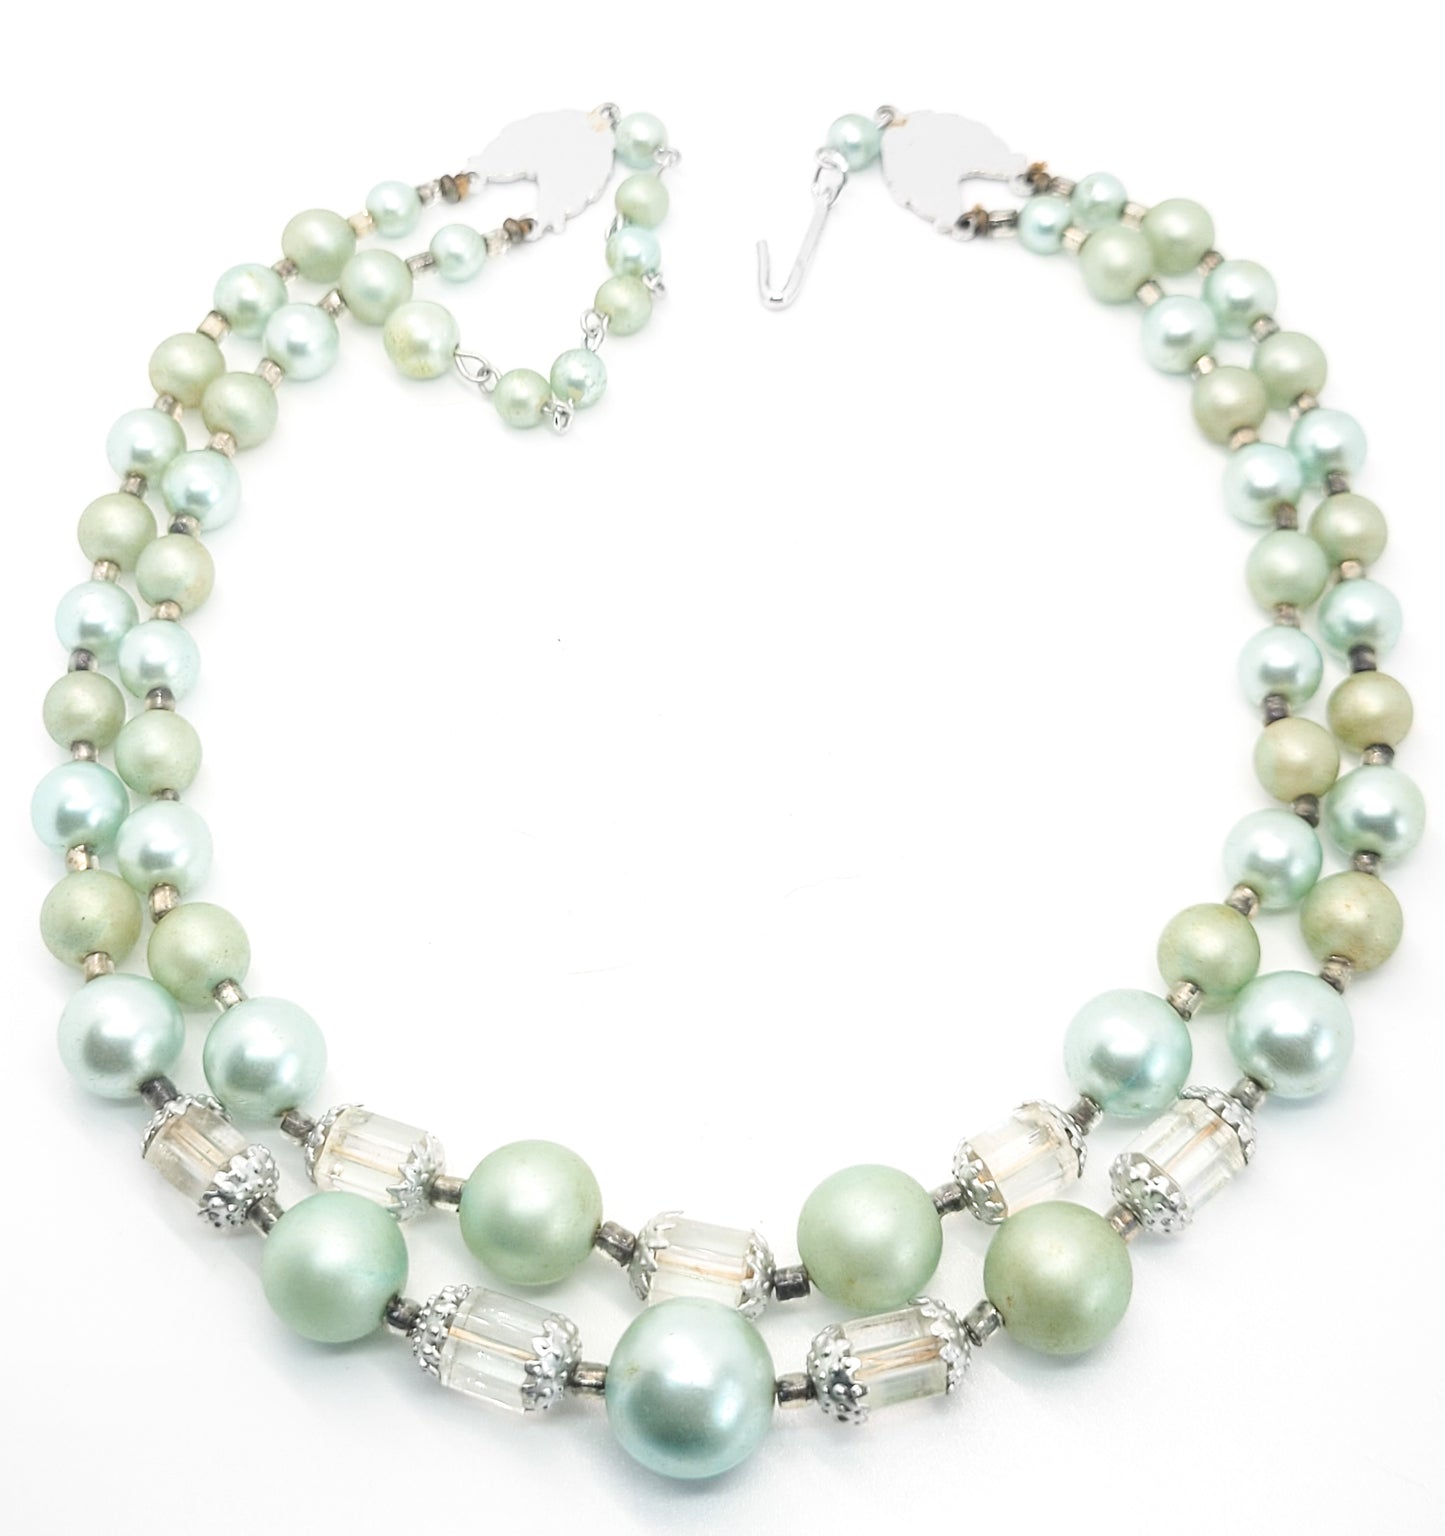 Seafoam green beaded silver toned Austrian crystal two tiered vintage necklace